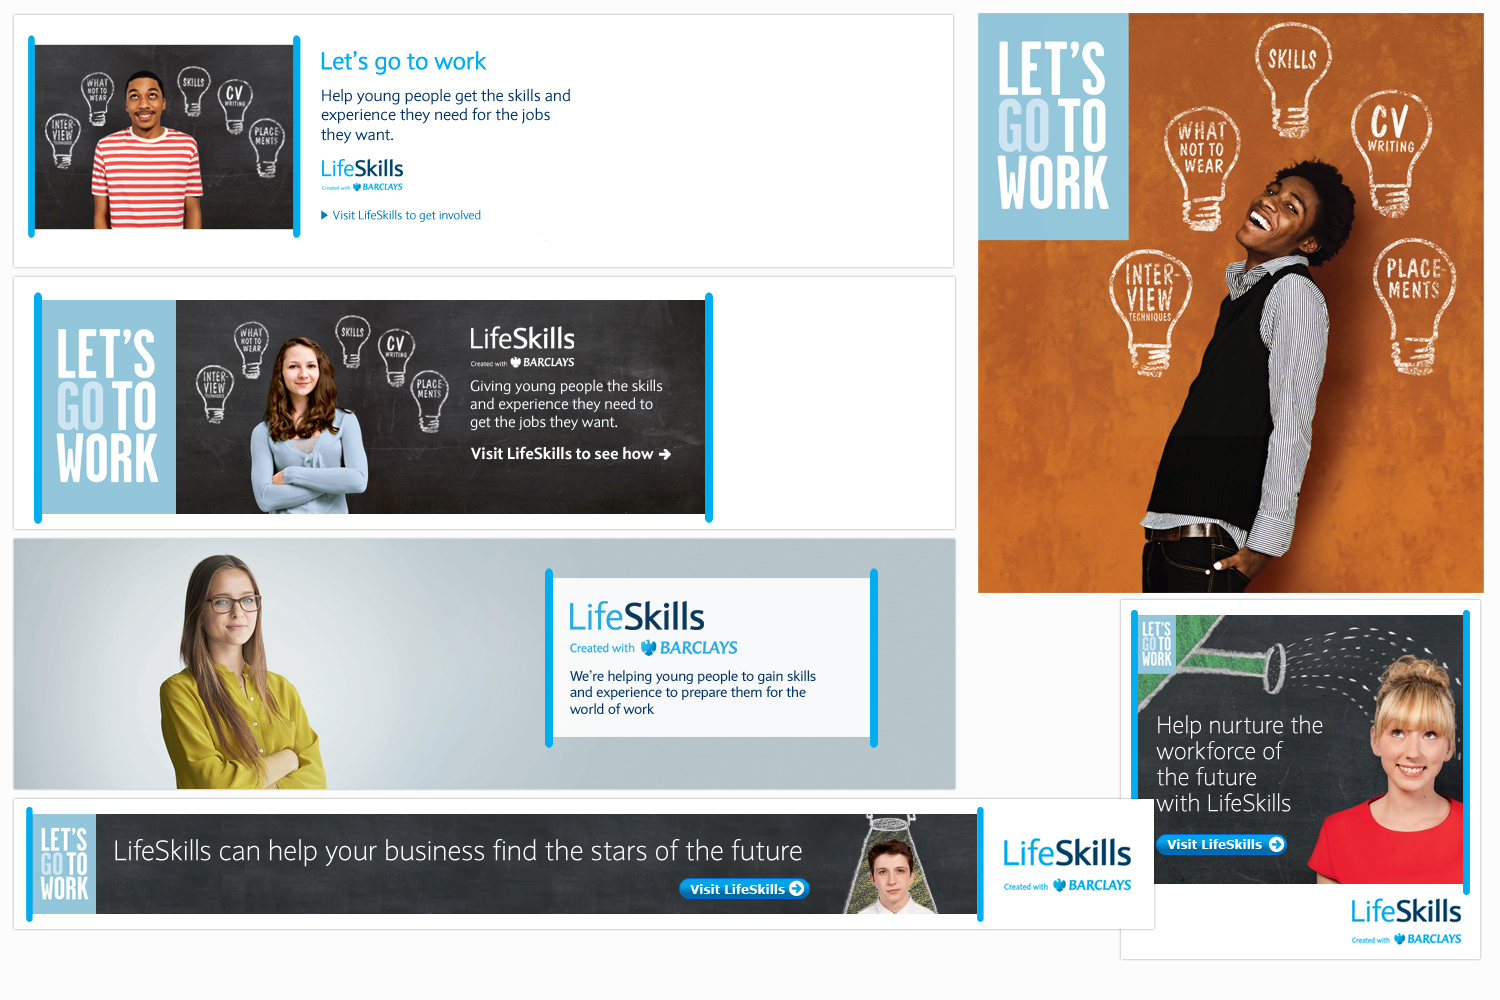  Samples of assets produced within Digital to support Marketing's Life Skills campaign 